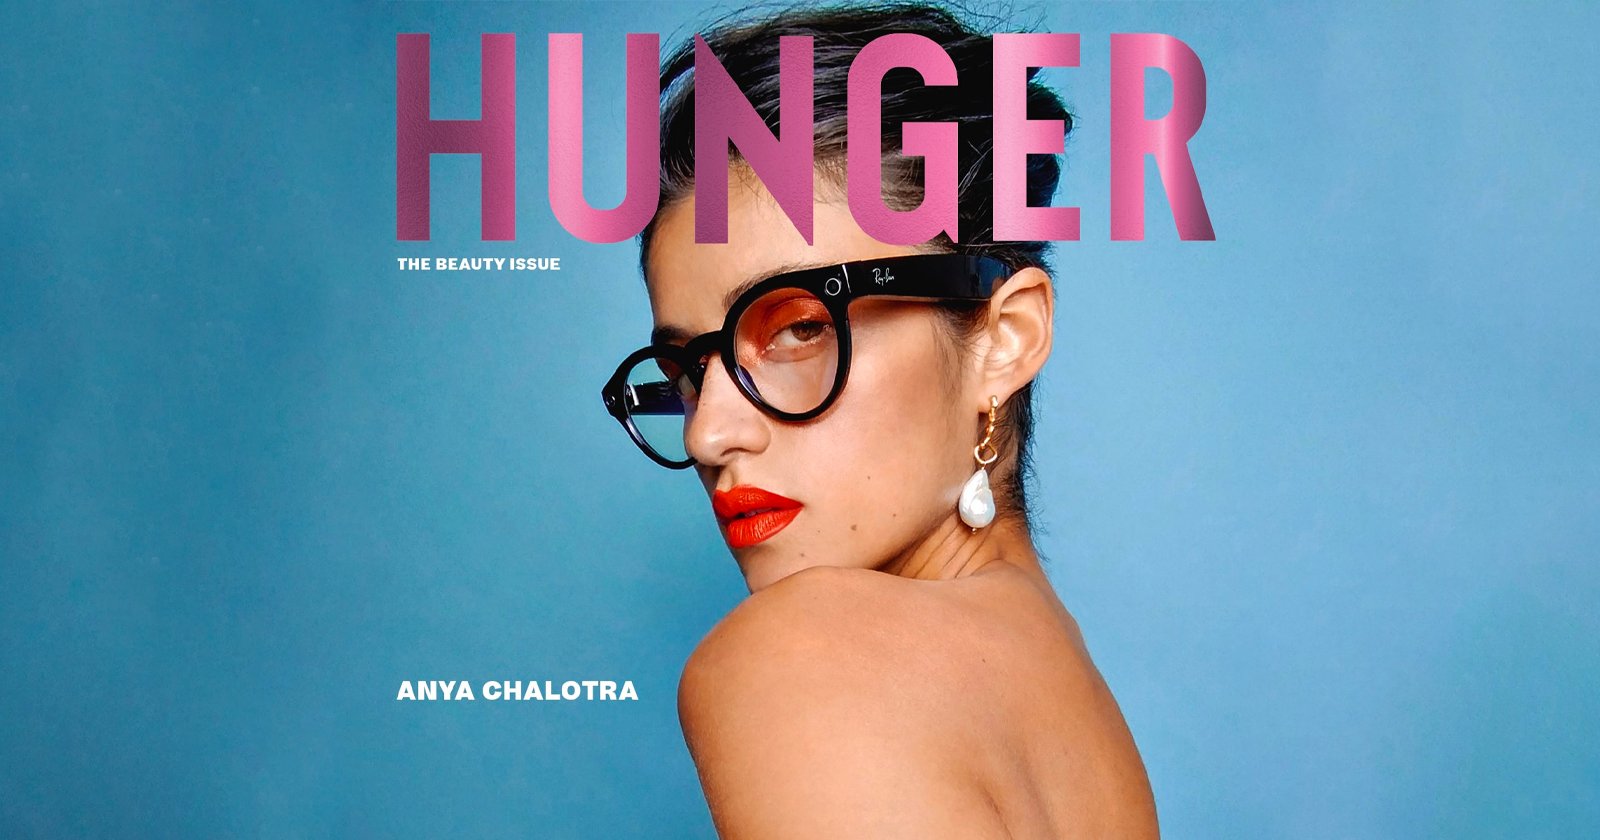 This is the world’s first magazine cover featuring smart glasses